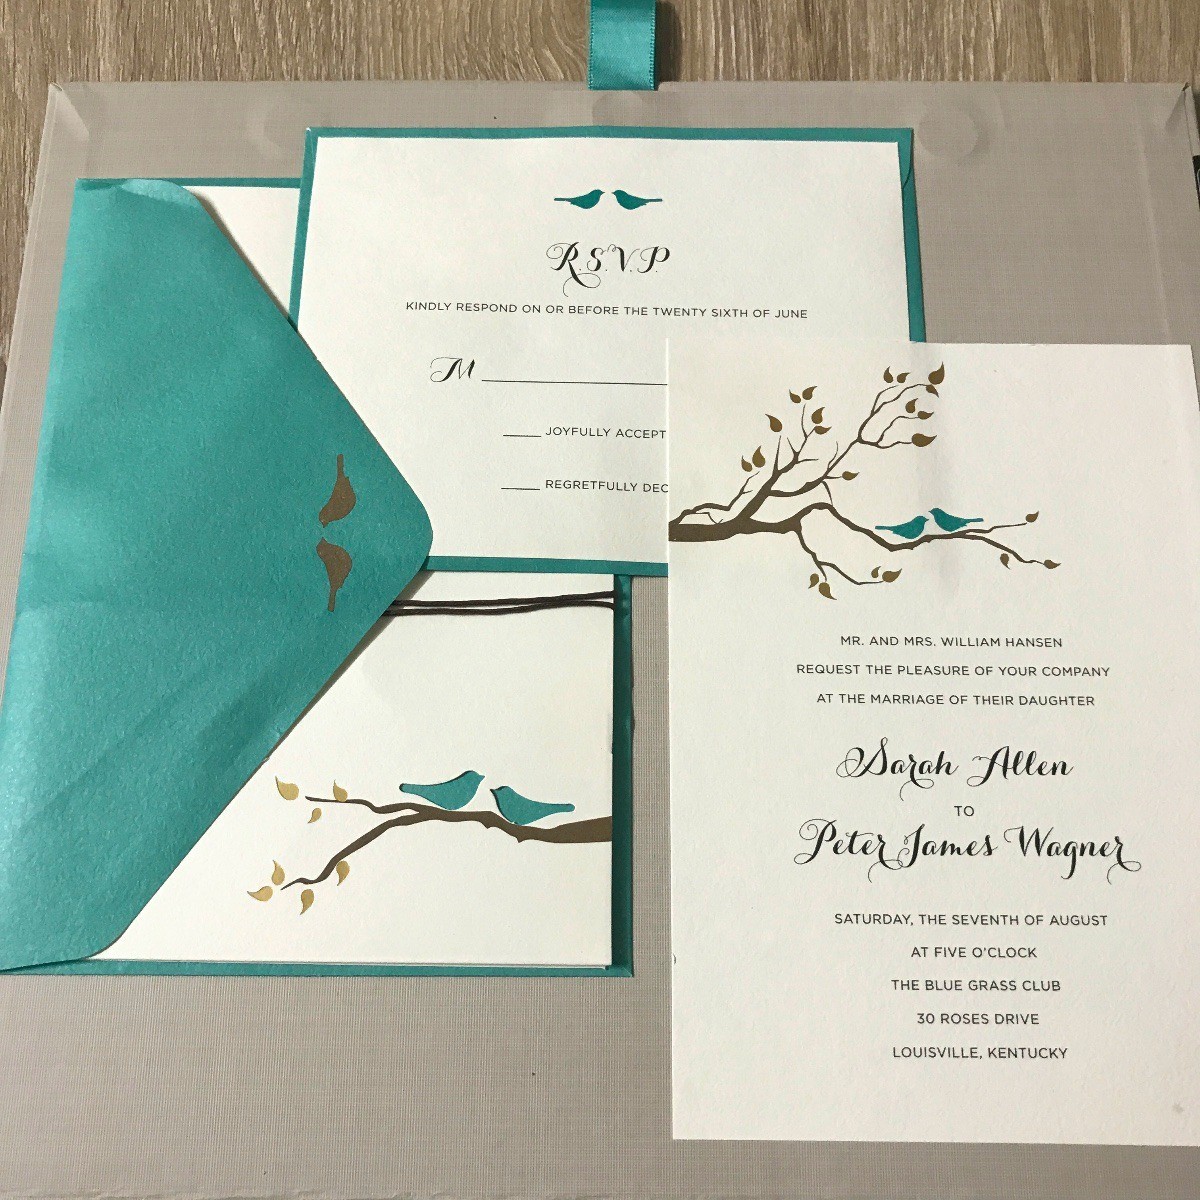 Using a Printable Kit for Wedding Invitations My Frugal Wedding